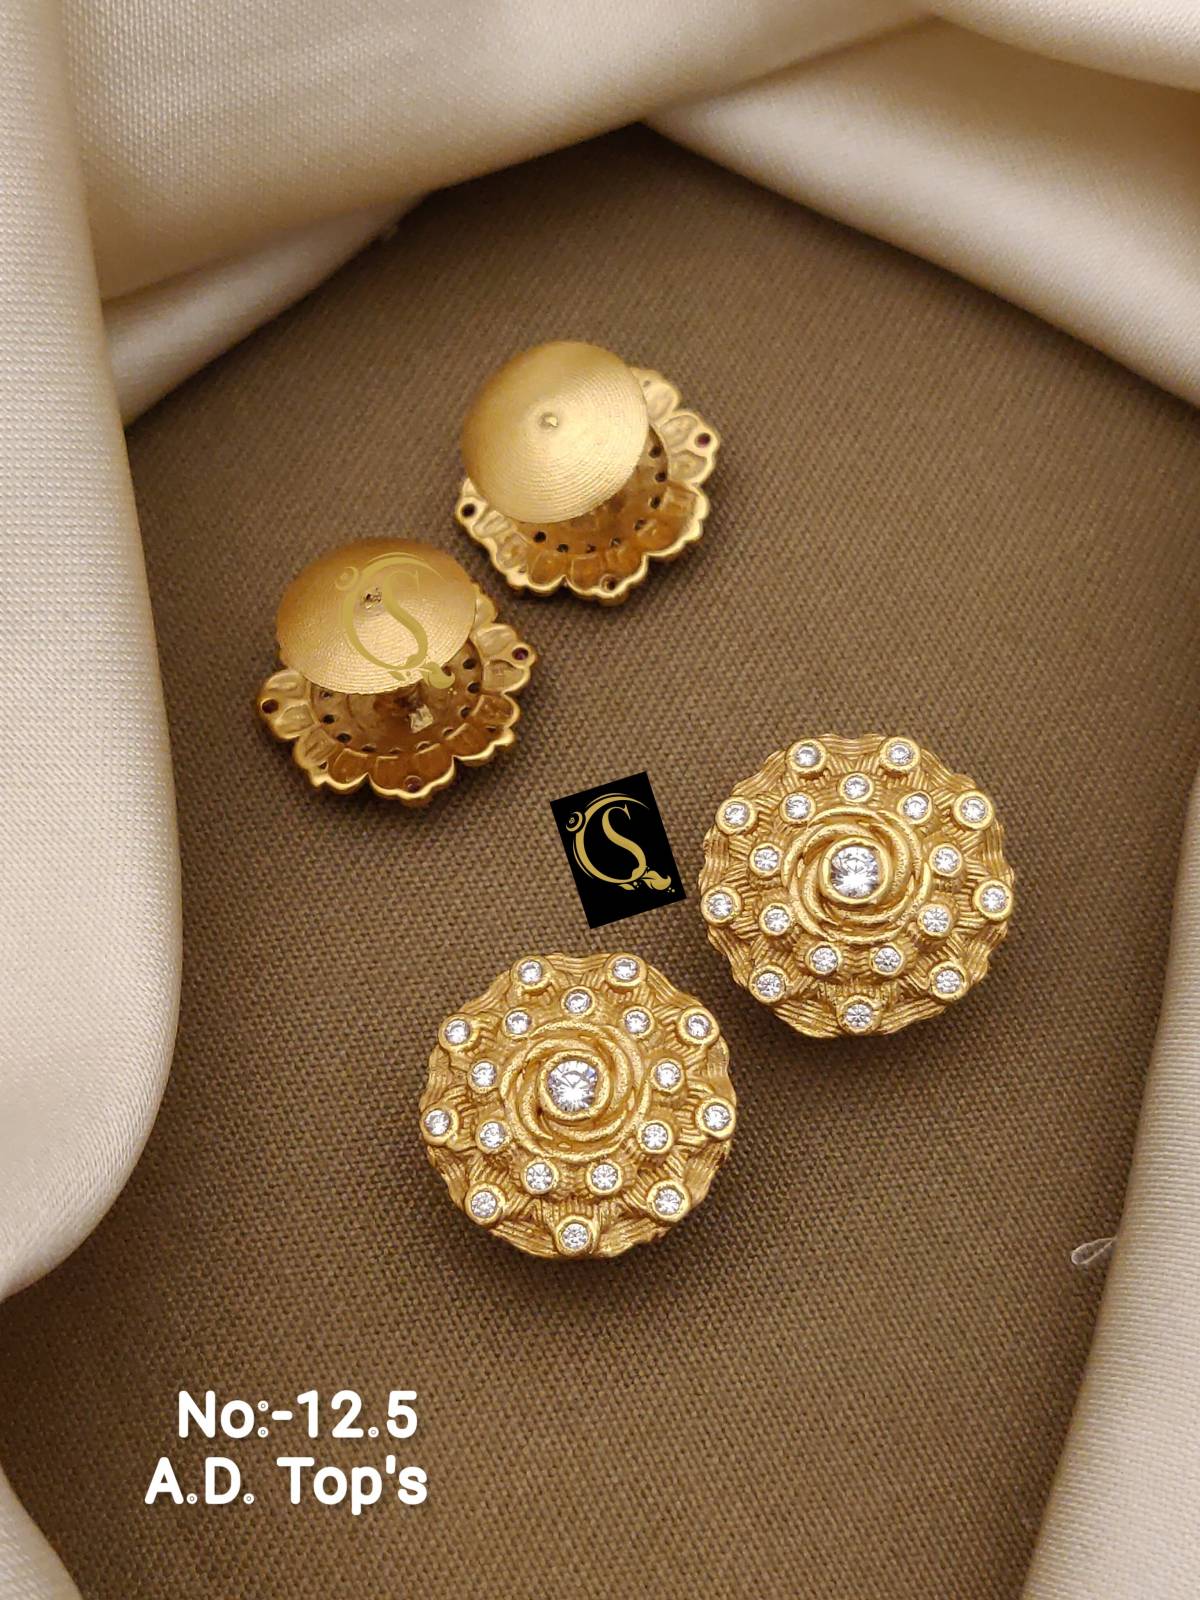 22 Karat Fancy Gold Tops with CZ - ErSi25649 - Large floral design stud  earrings, fashioned in 22 karat yellow gold, with dazzling cubic zirconia s